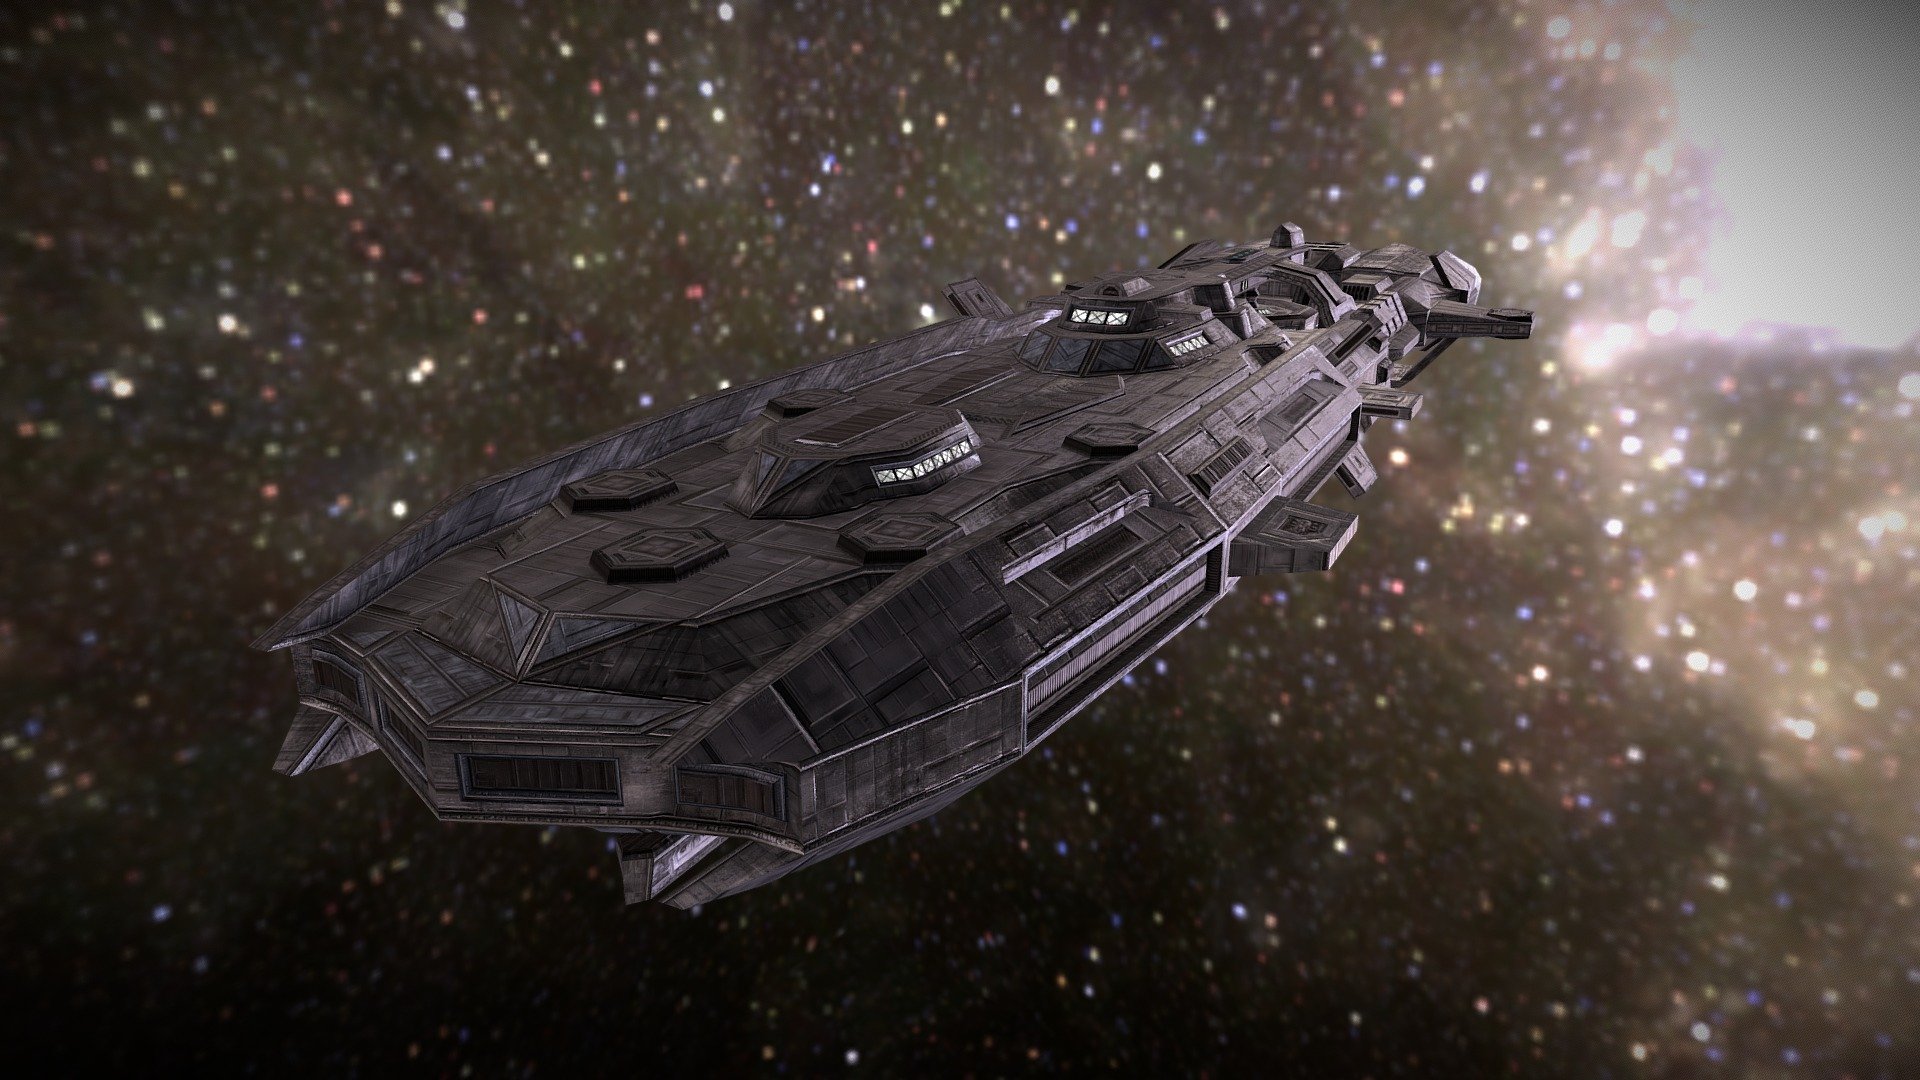 A destroyer-class capital ship that I made for a mod to the good old space-sim game &ldquo;Freelancer